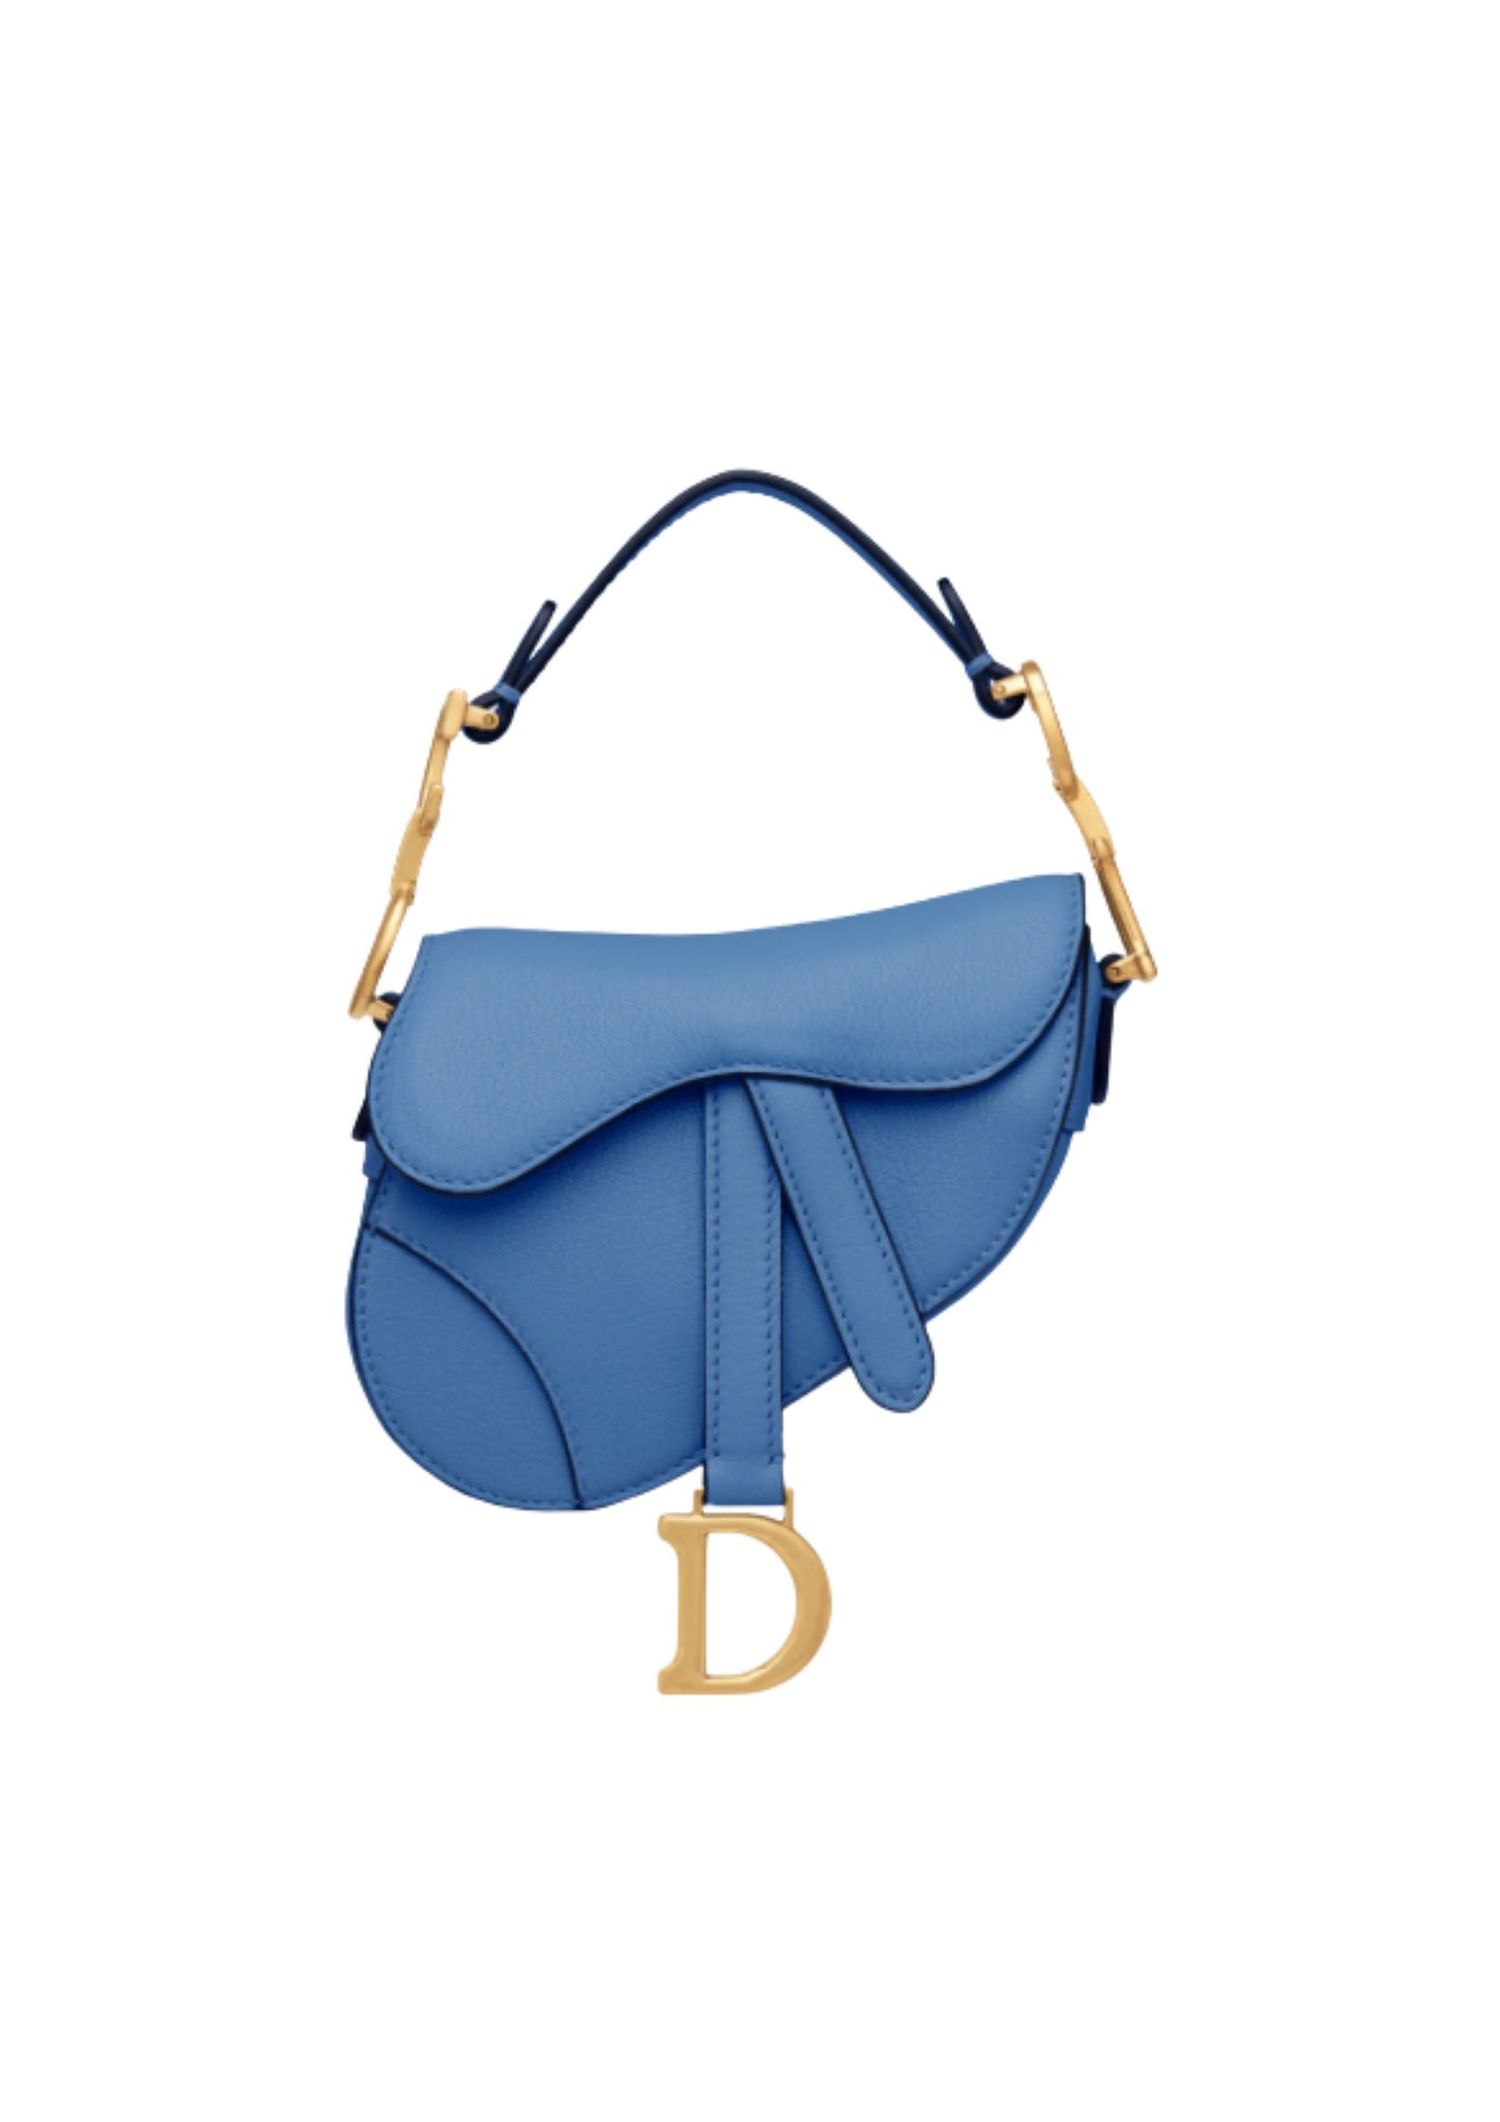 Gifts That Will Impress the Hermès Bag Lover